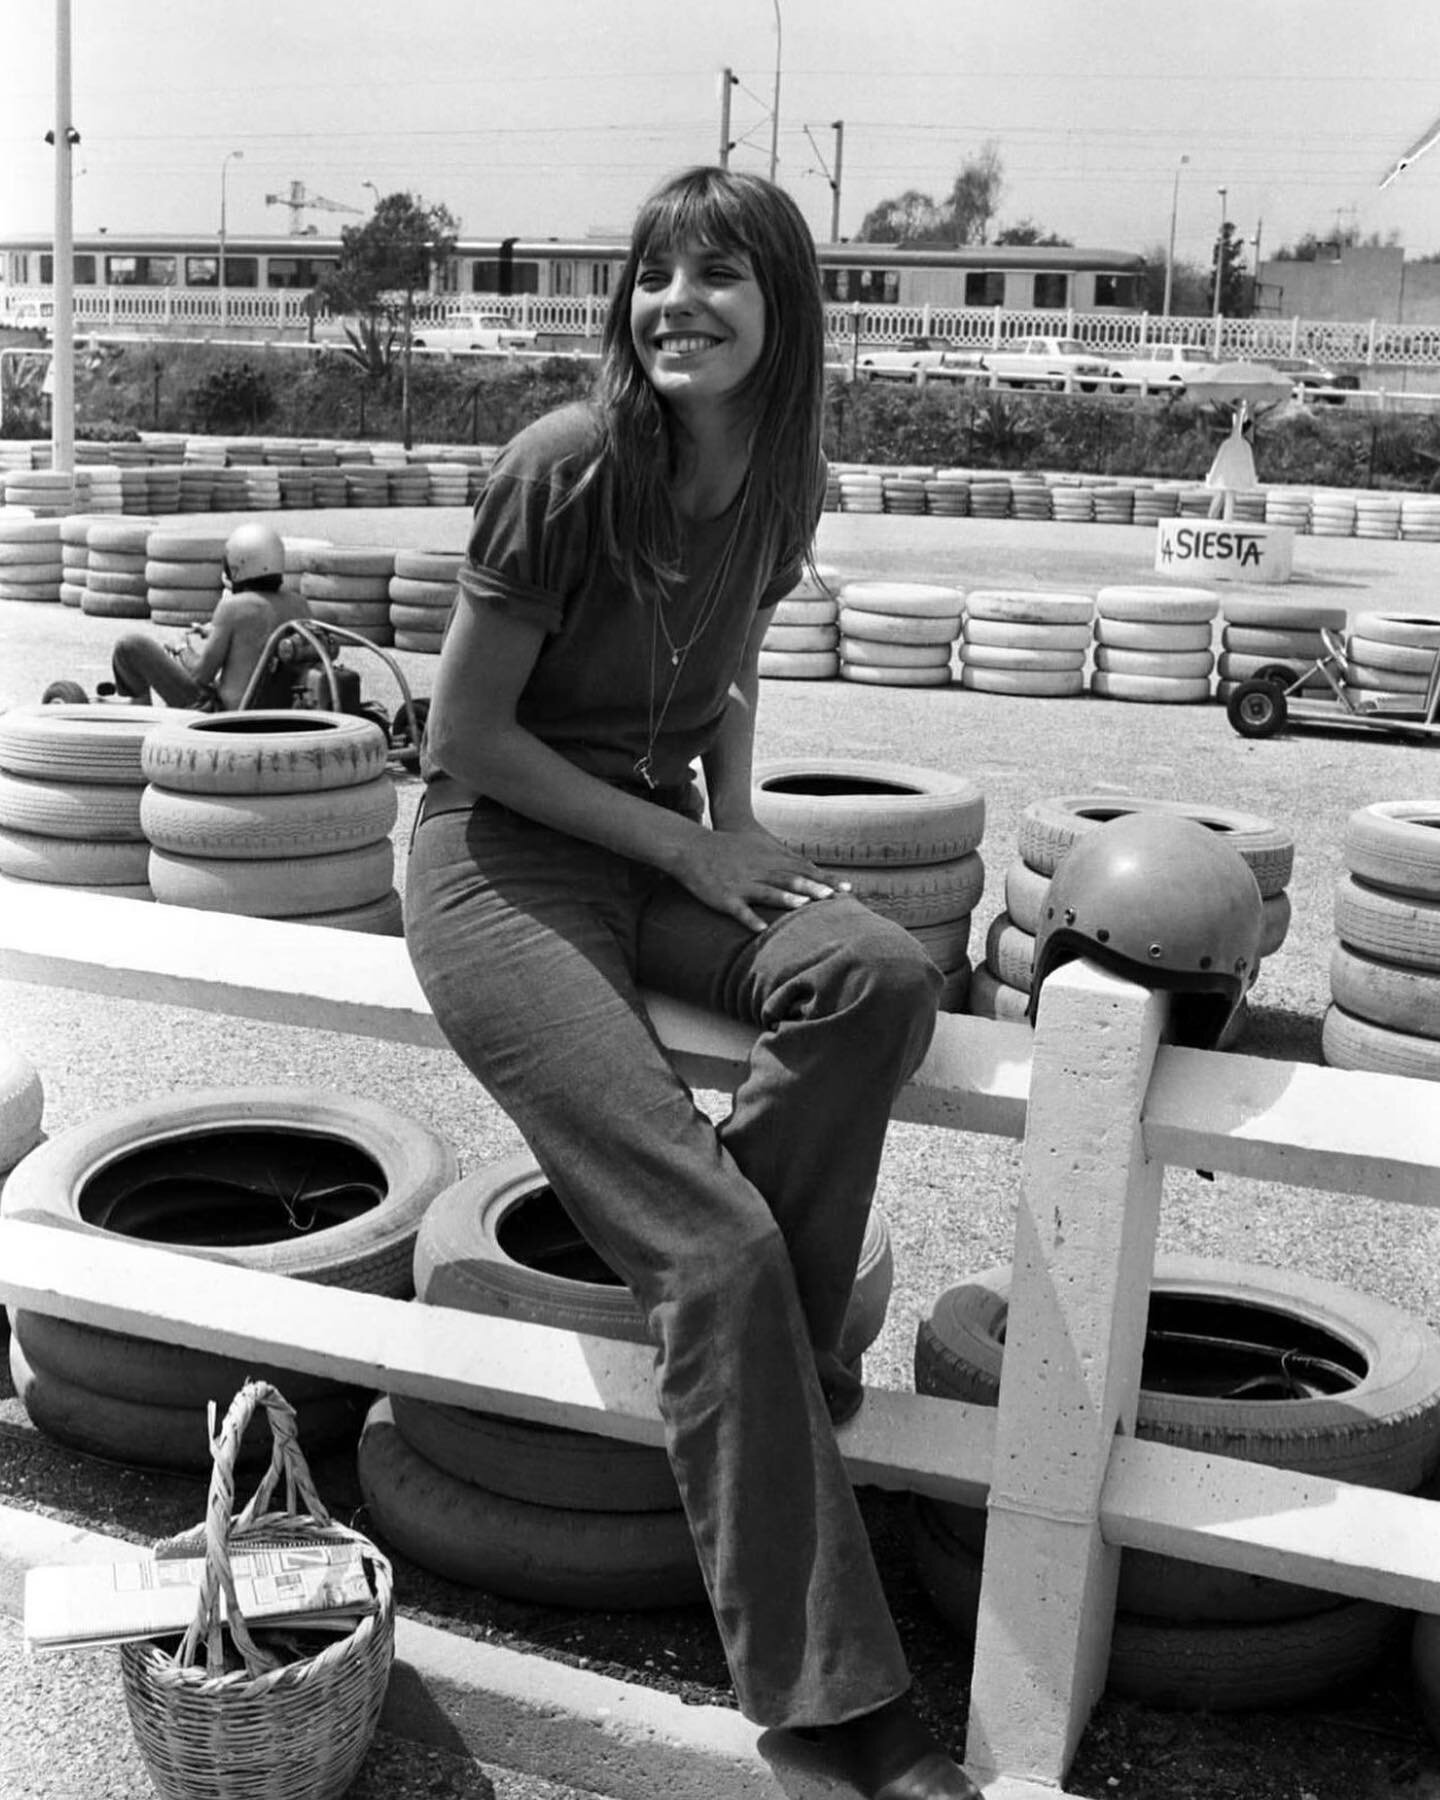 A true icon.
RIP Jane Birkin, your style will continue to inspire us x